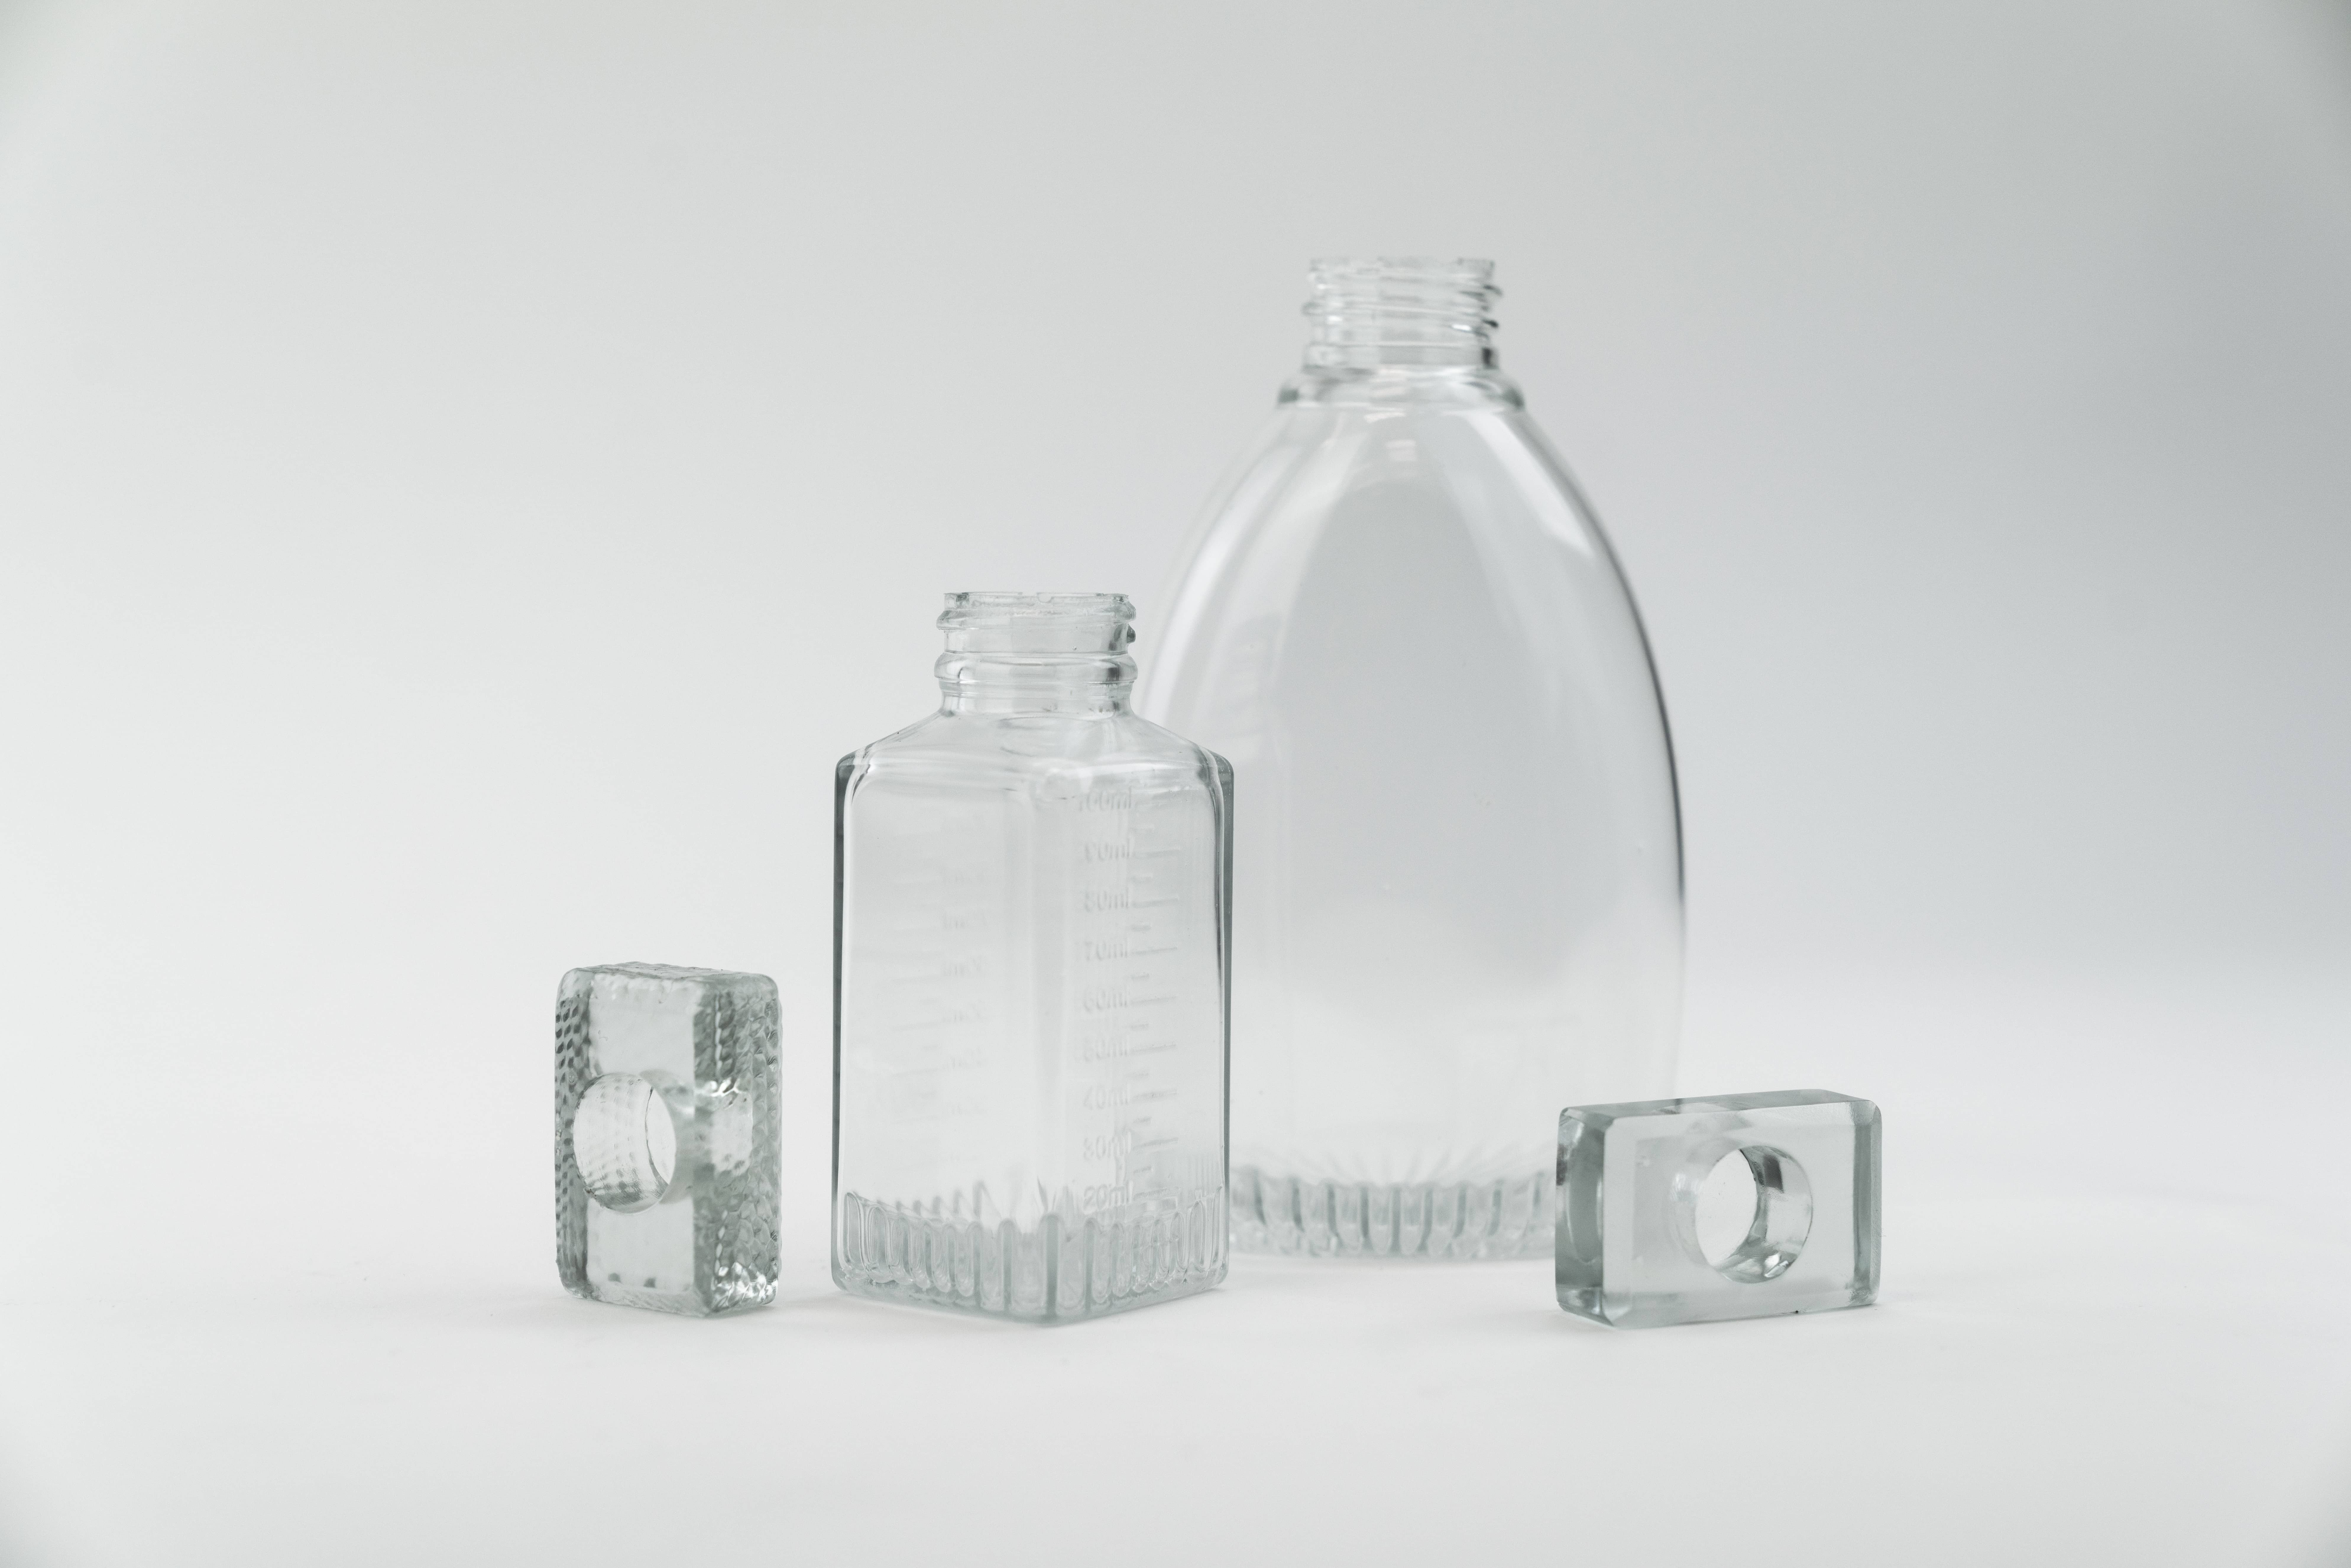 Additive Innovation: 3D Printing Clear Parts With Resin